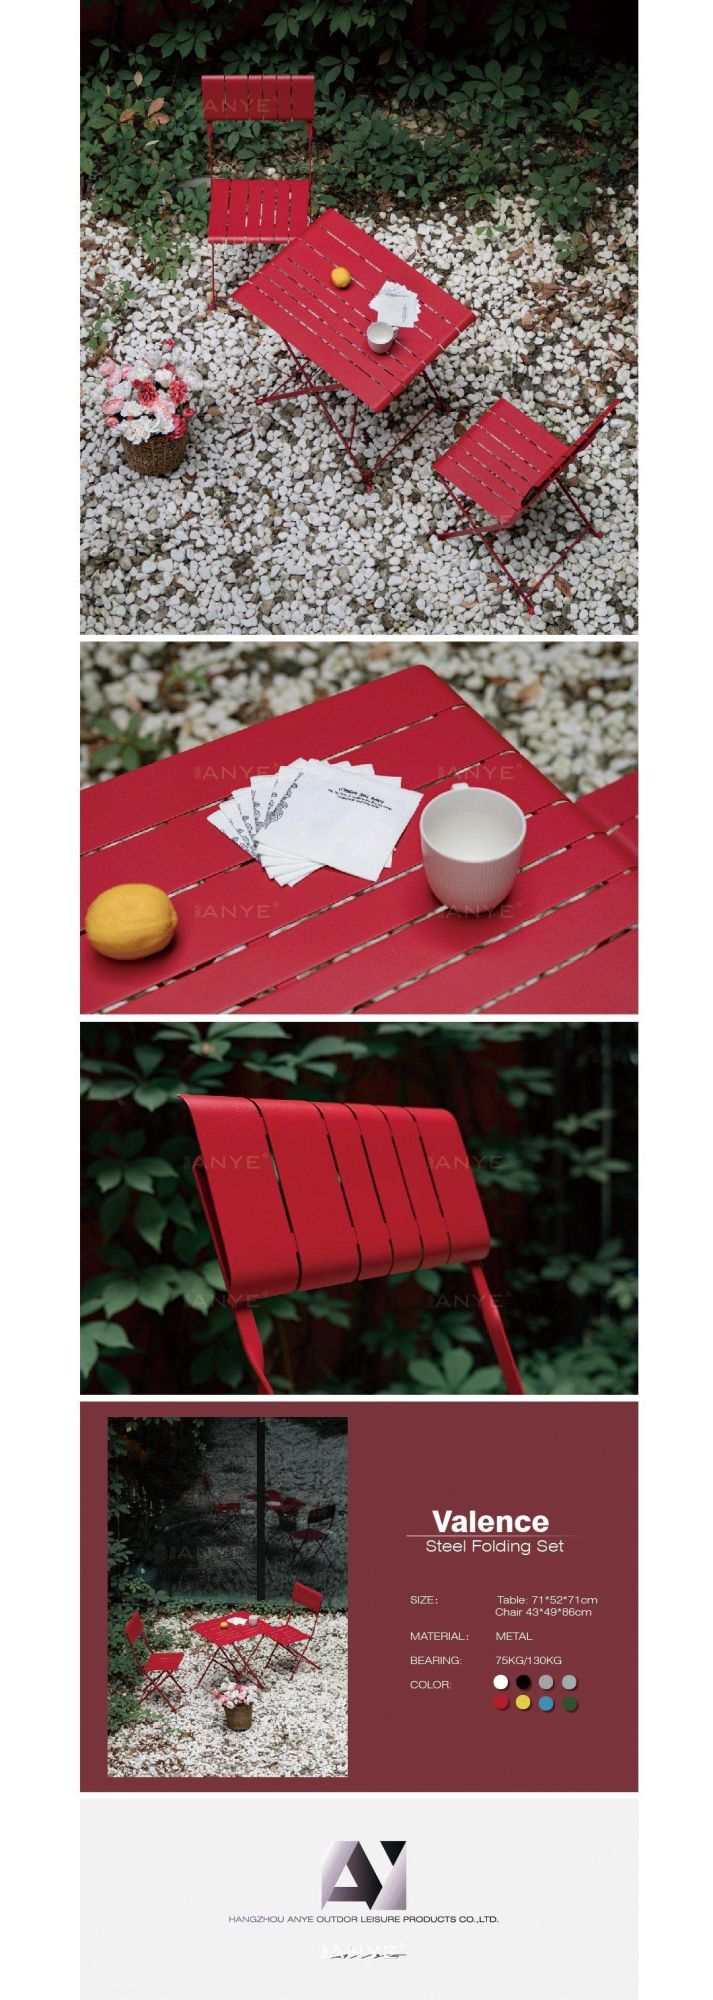 Casual Furniture Portable Set of Folding Square Table and Chair Garden Dining Furniture